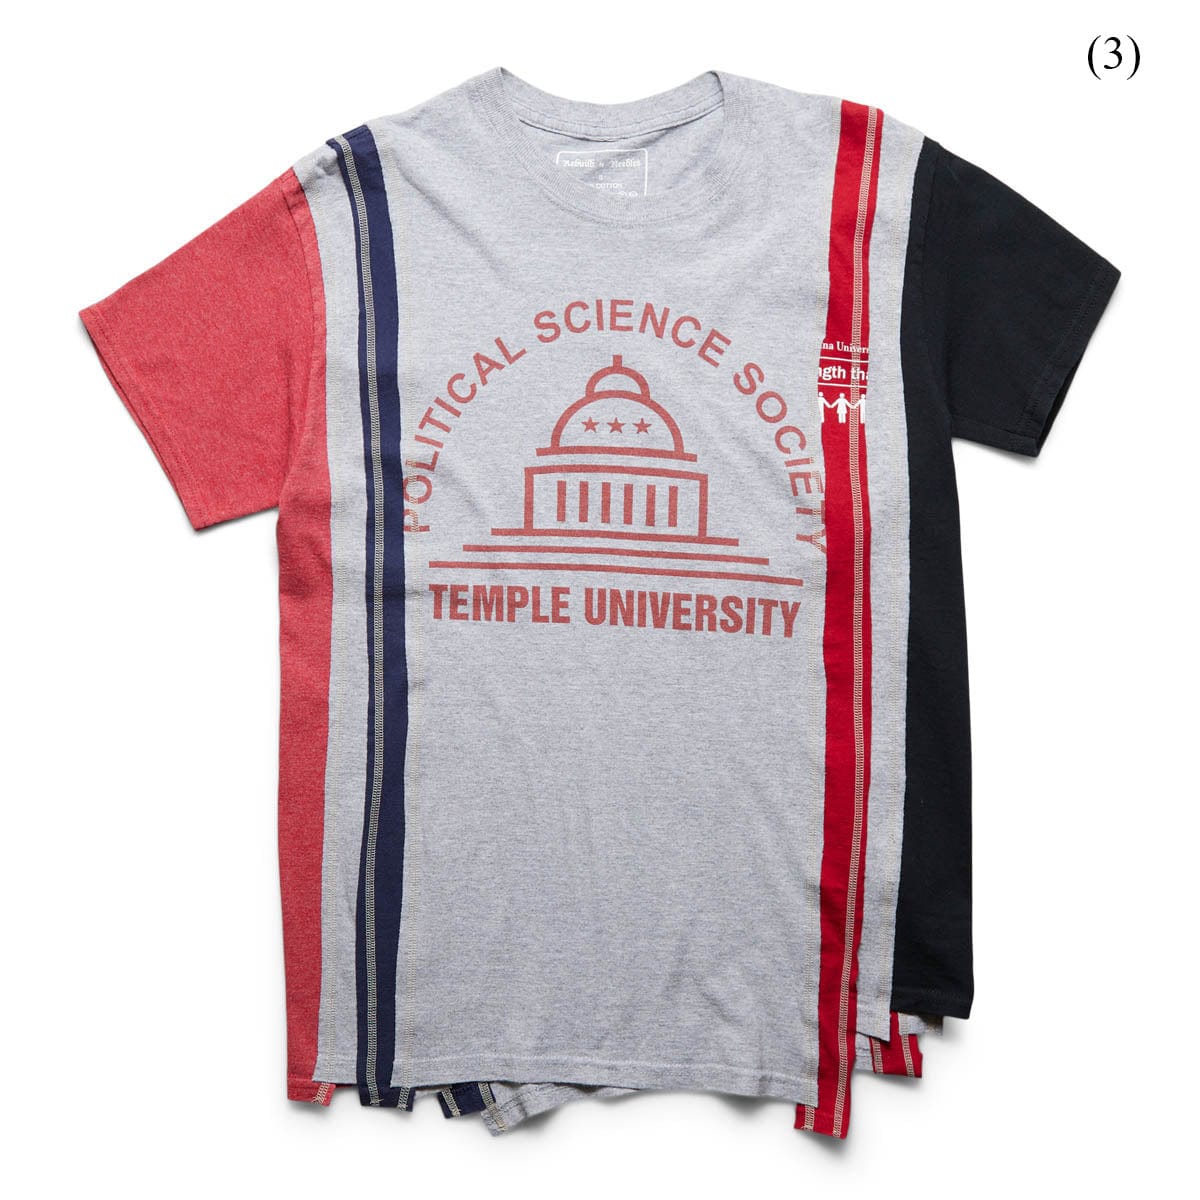 Needles 7 CUTS S/S TEE - Temple University COLLEGE SS22 (SMALL/MULTIPLE STYLES)